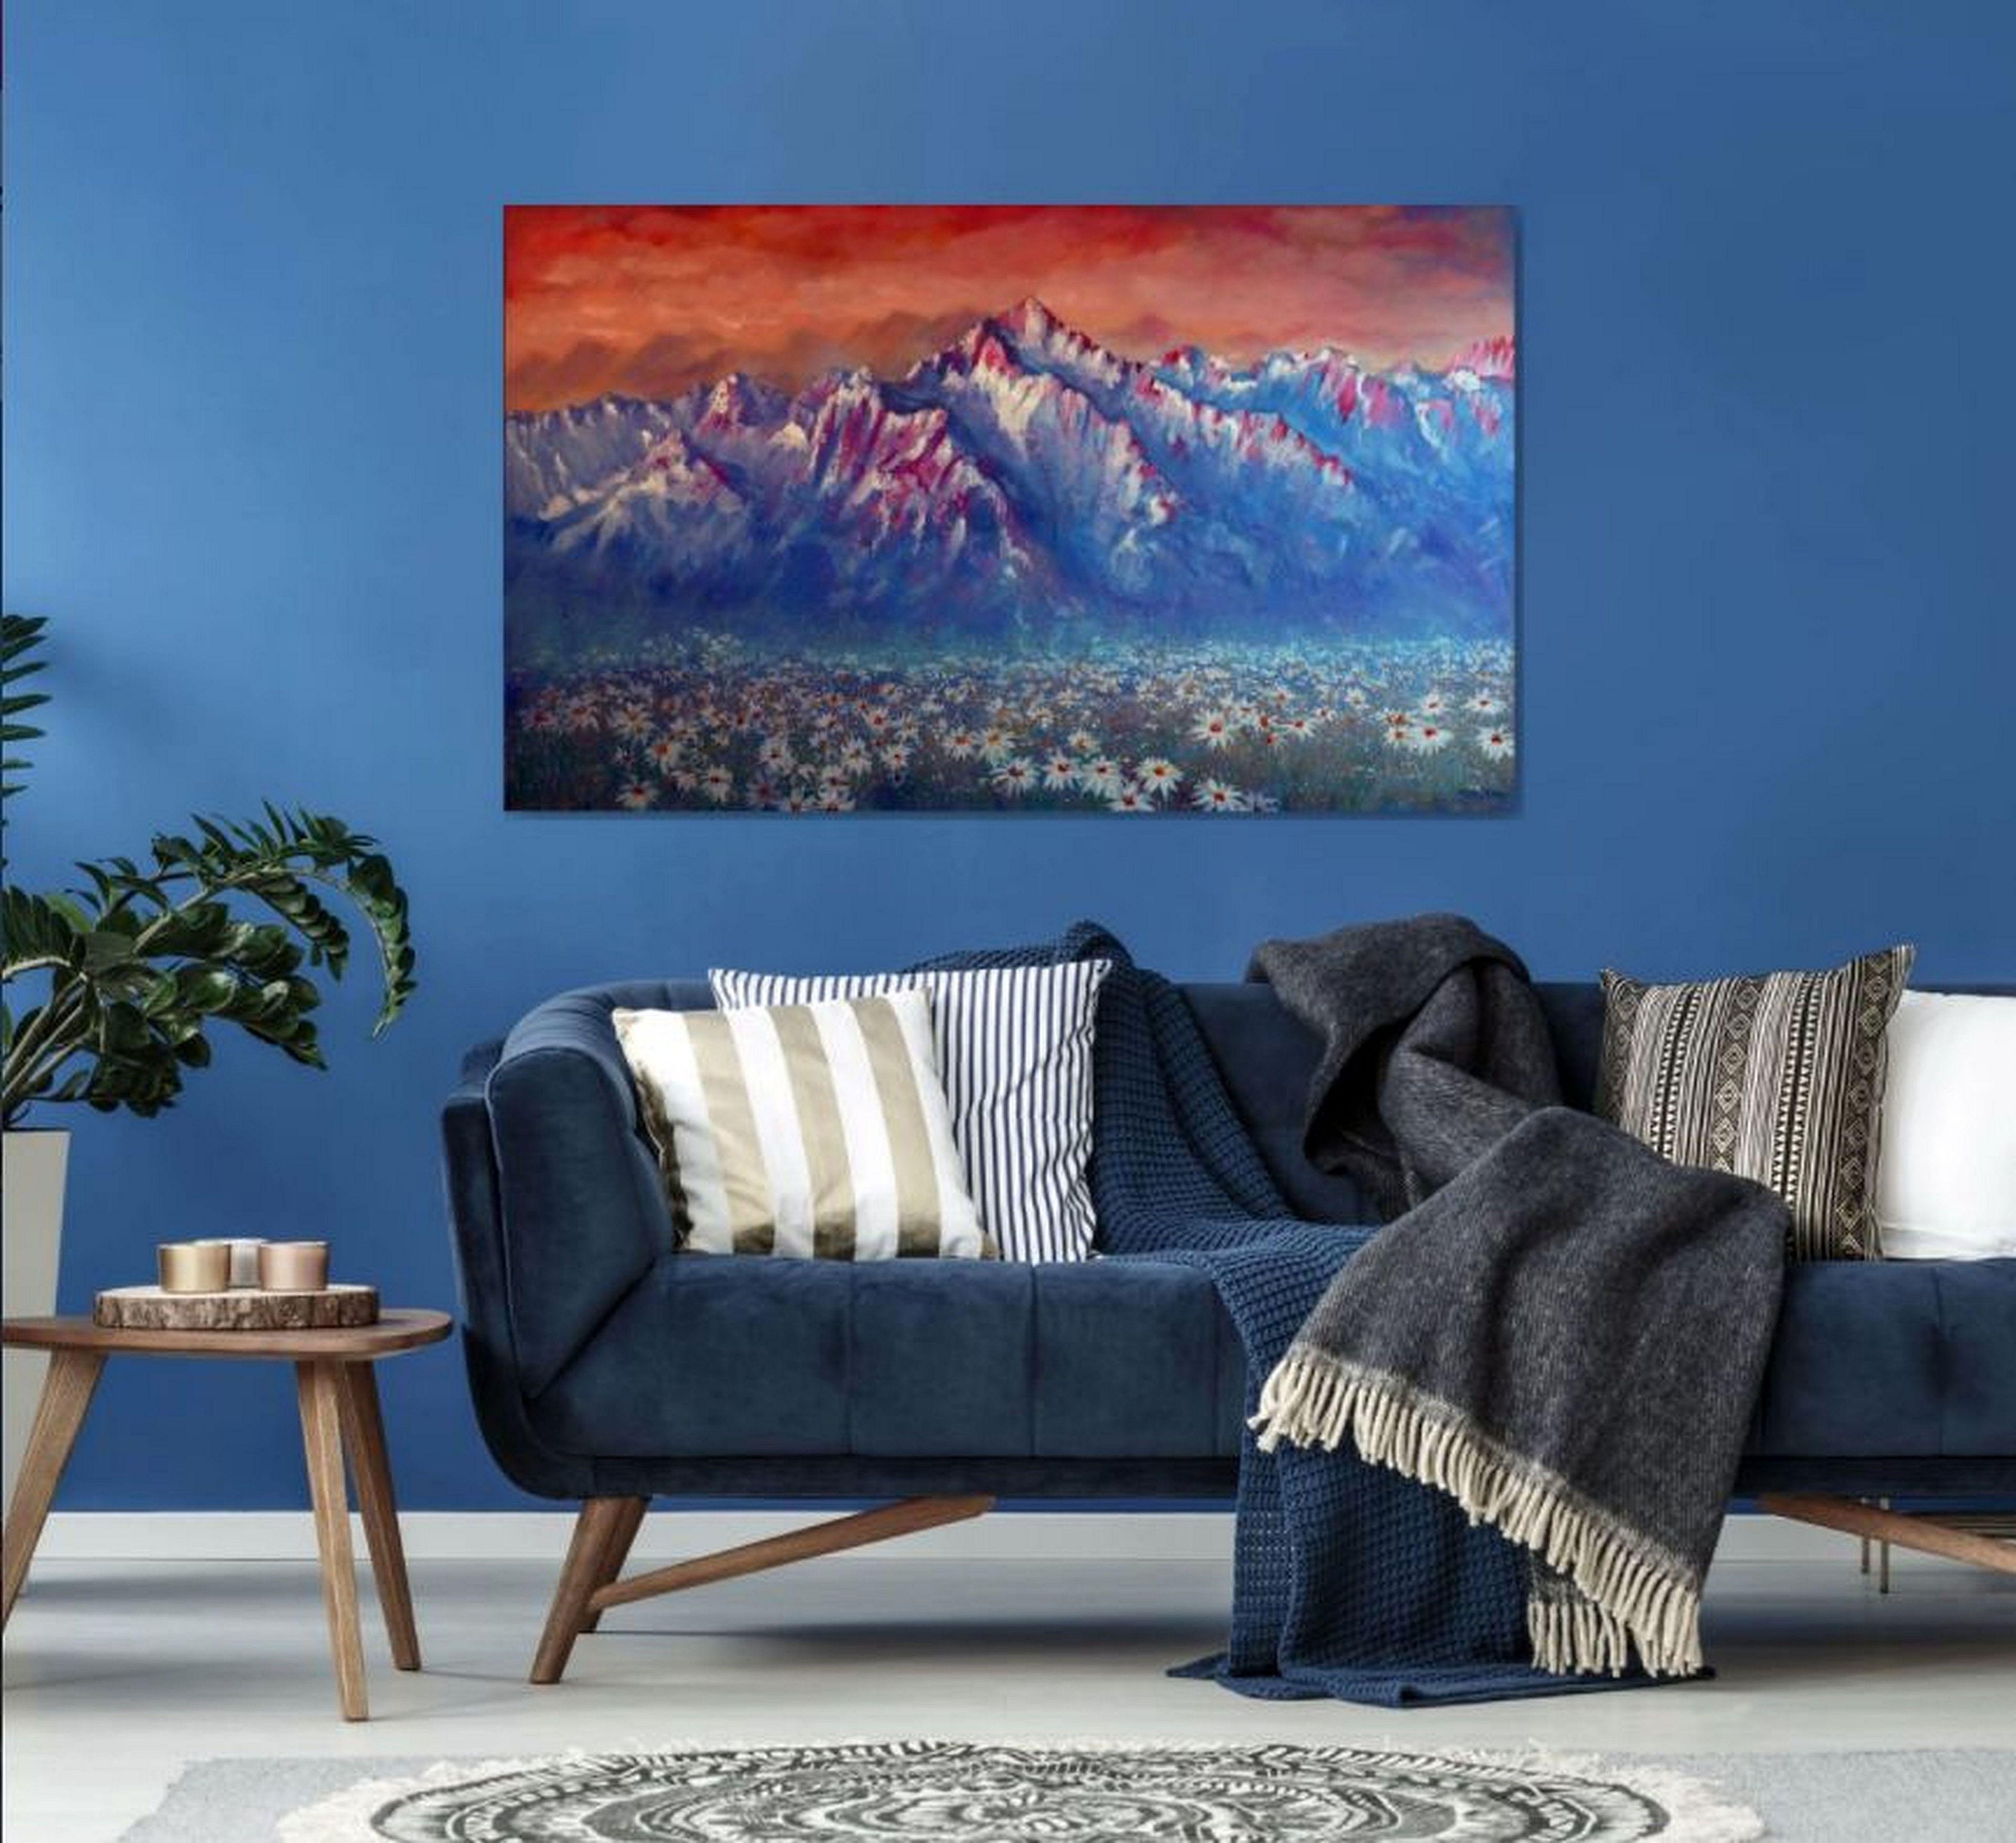 In creating this vibrant piece, I blended the immersive textures of acrylic with the fluidity of oil to capture nature’s raw beauty and essence. It's an amalgam of expressionism, impressionism, and realism, reflecting my profound connection to the